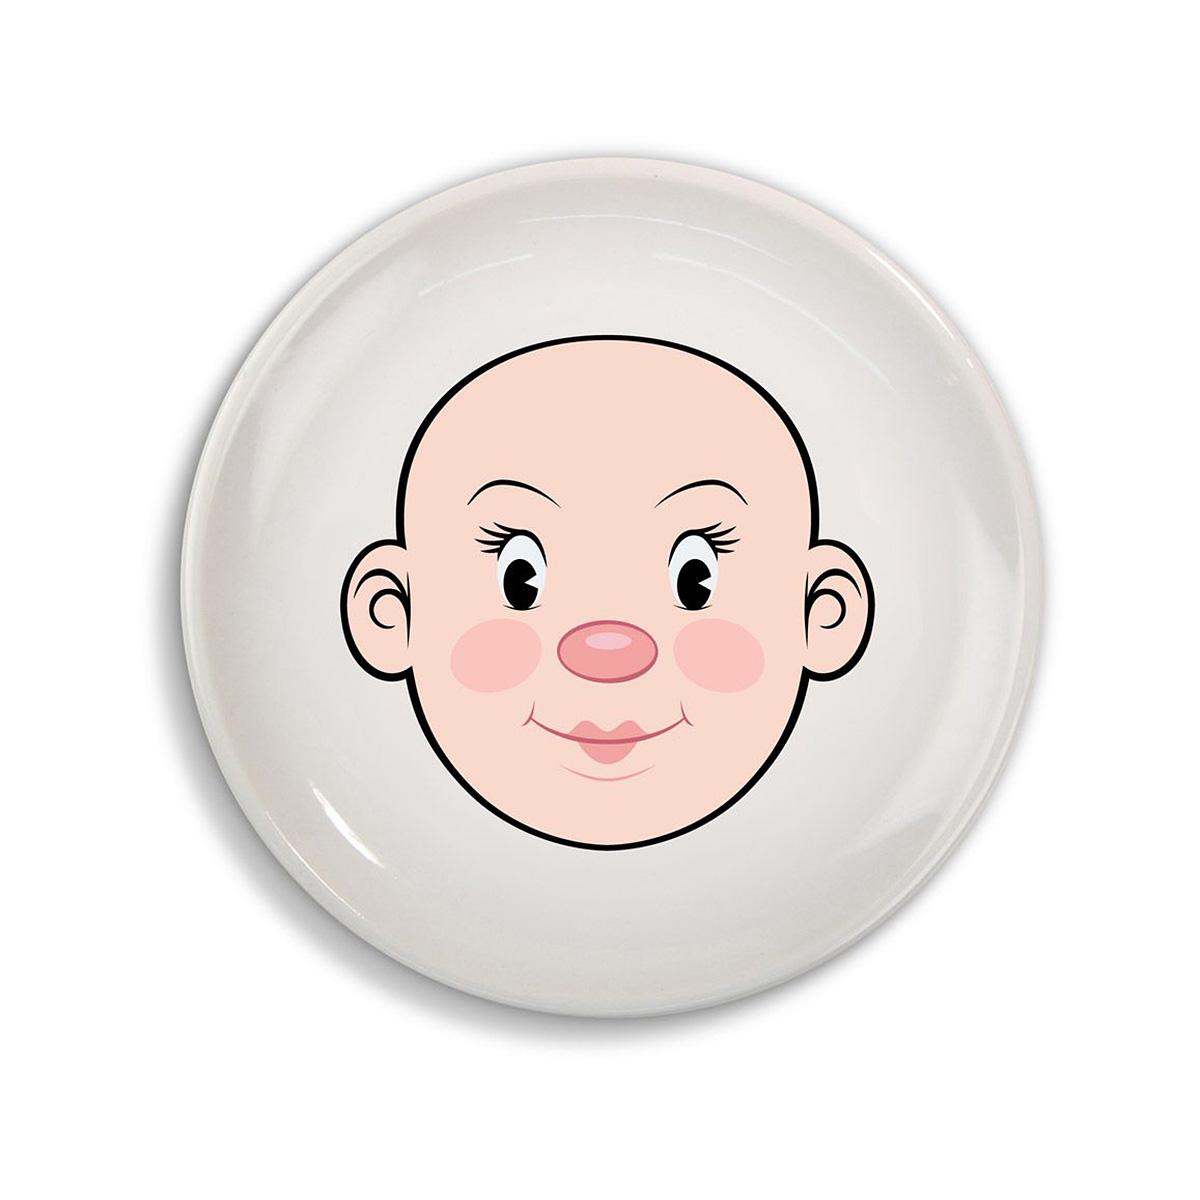  Girl Food Face Plate